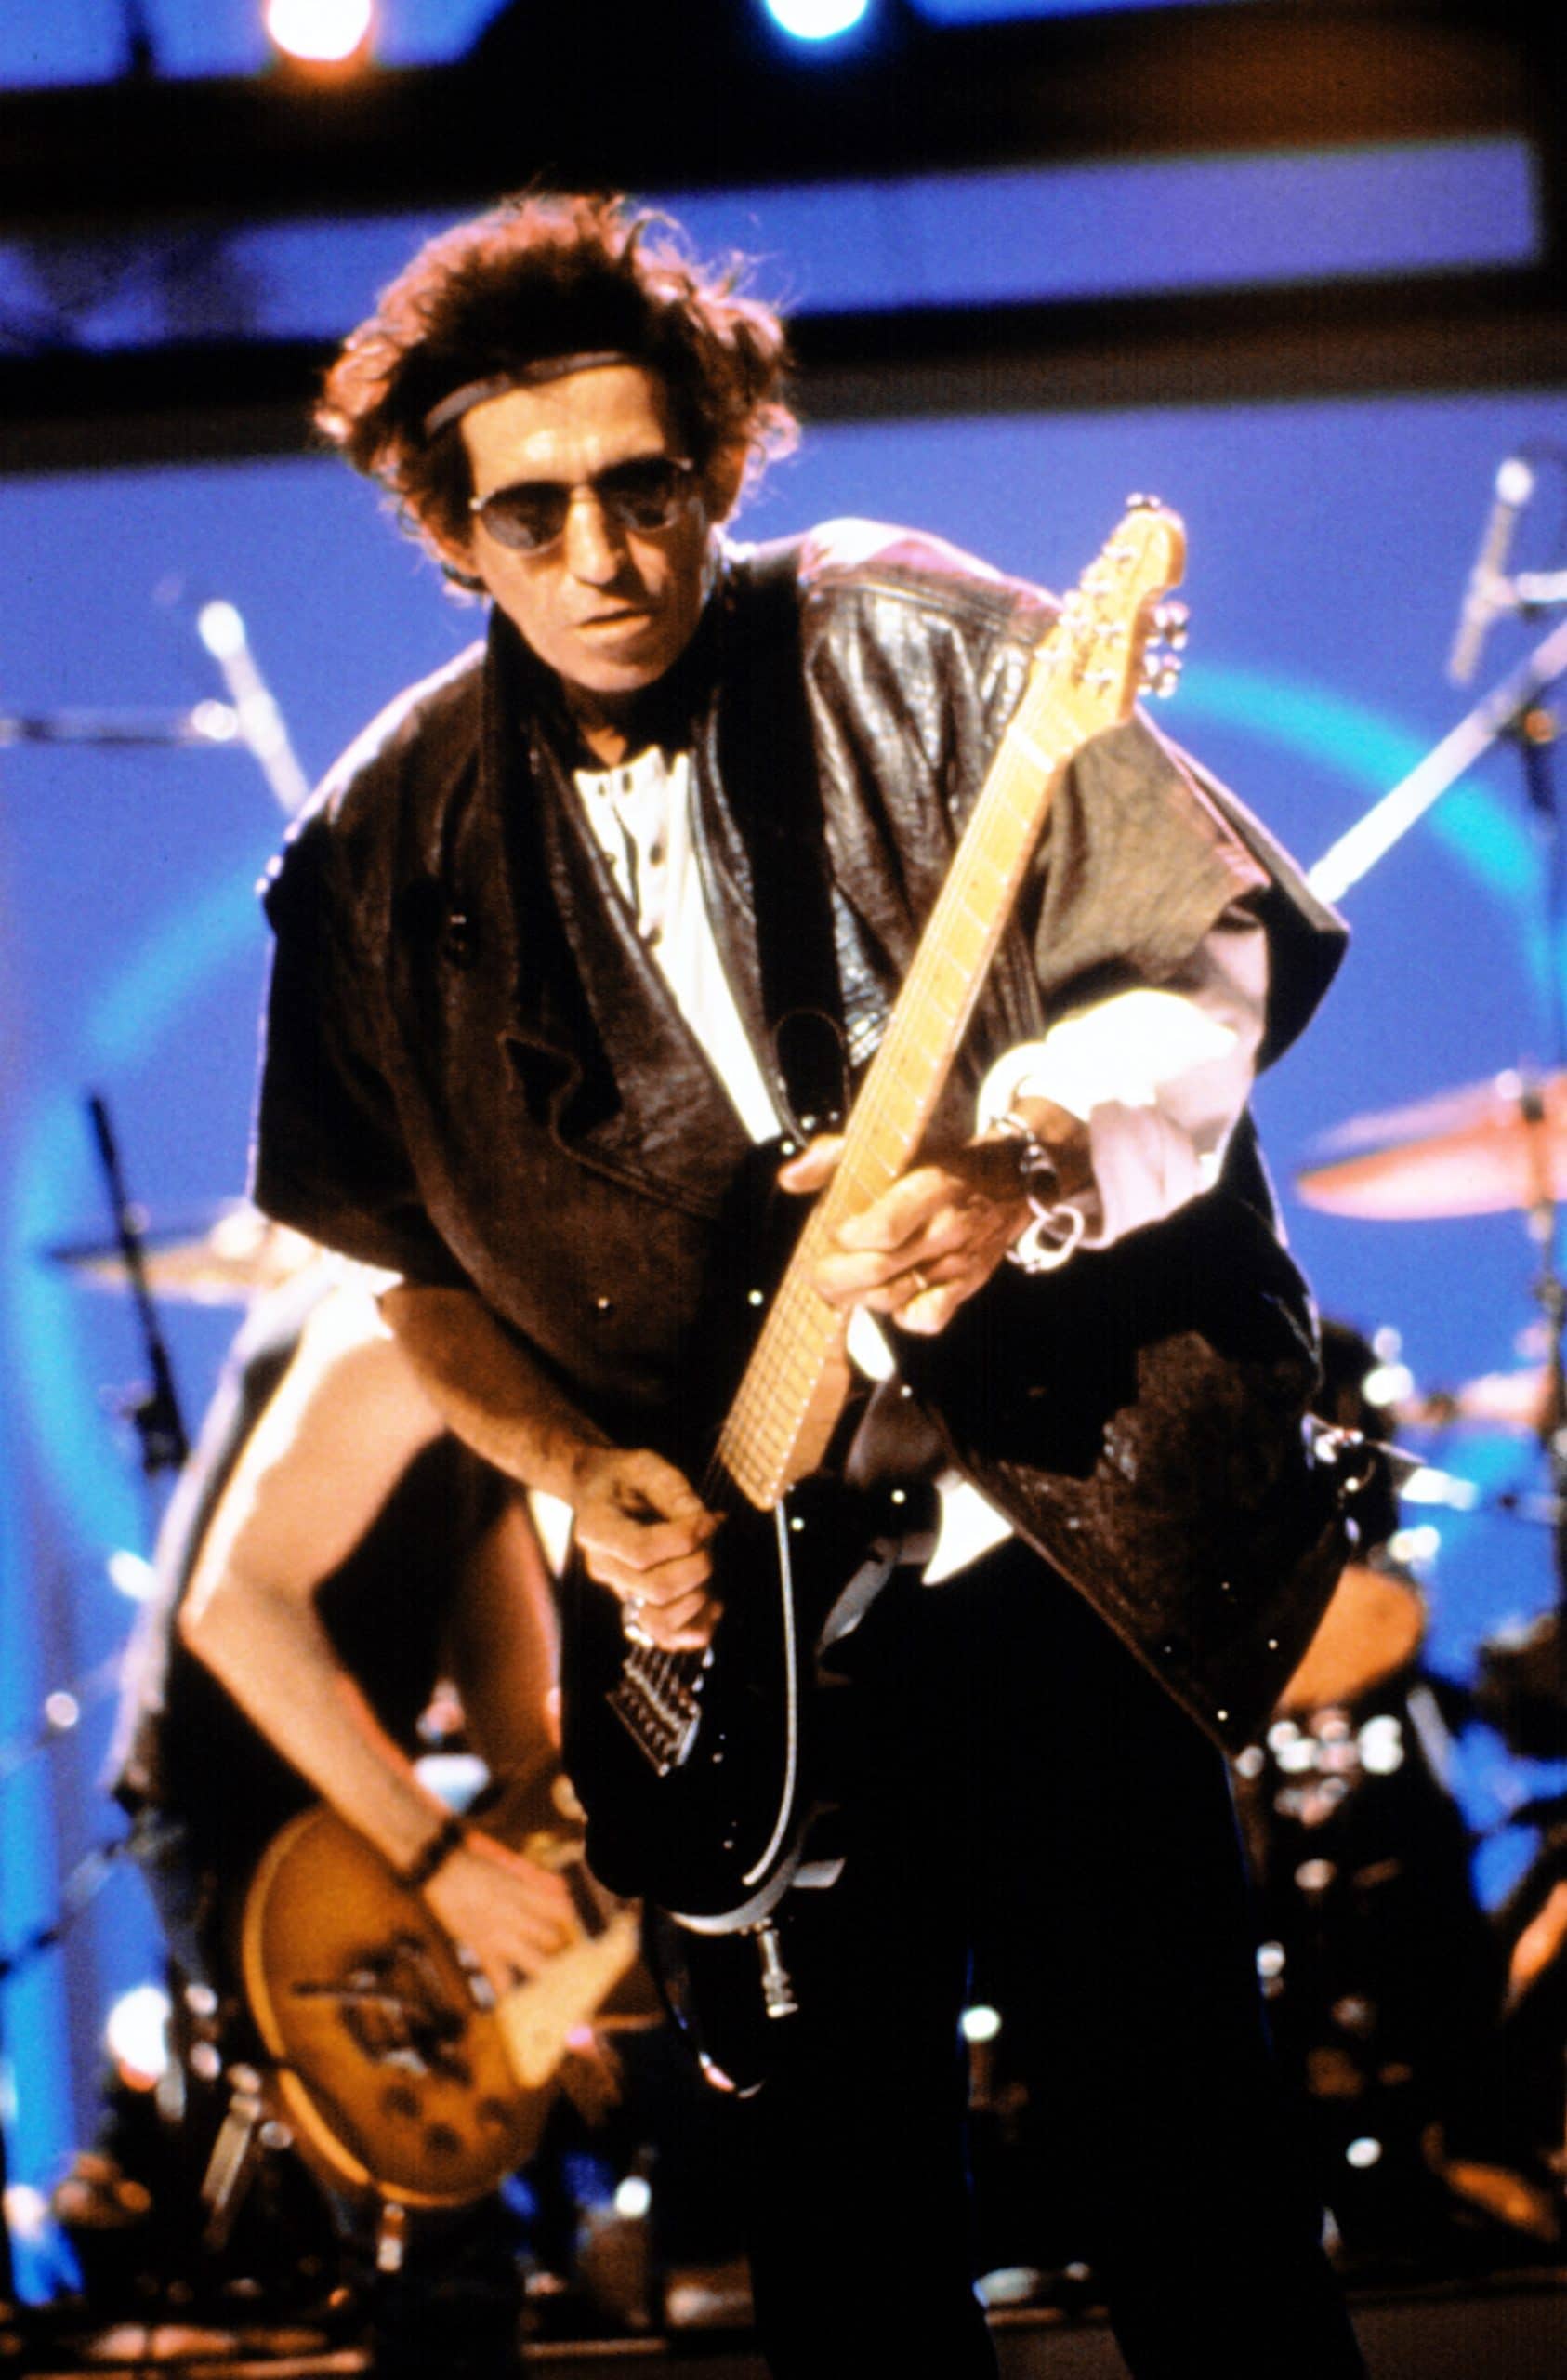 Keith Richards, performing with The Rolling Stones on CENTER STAGE